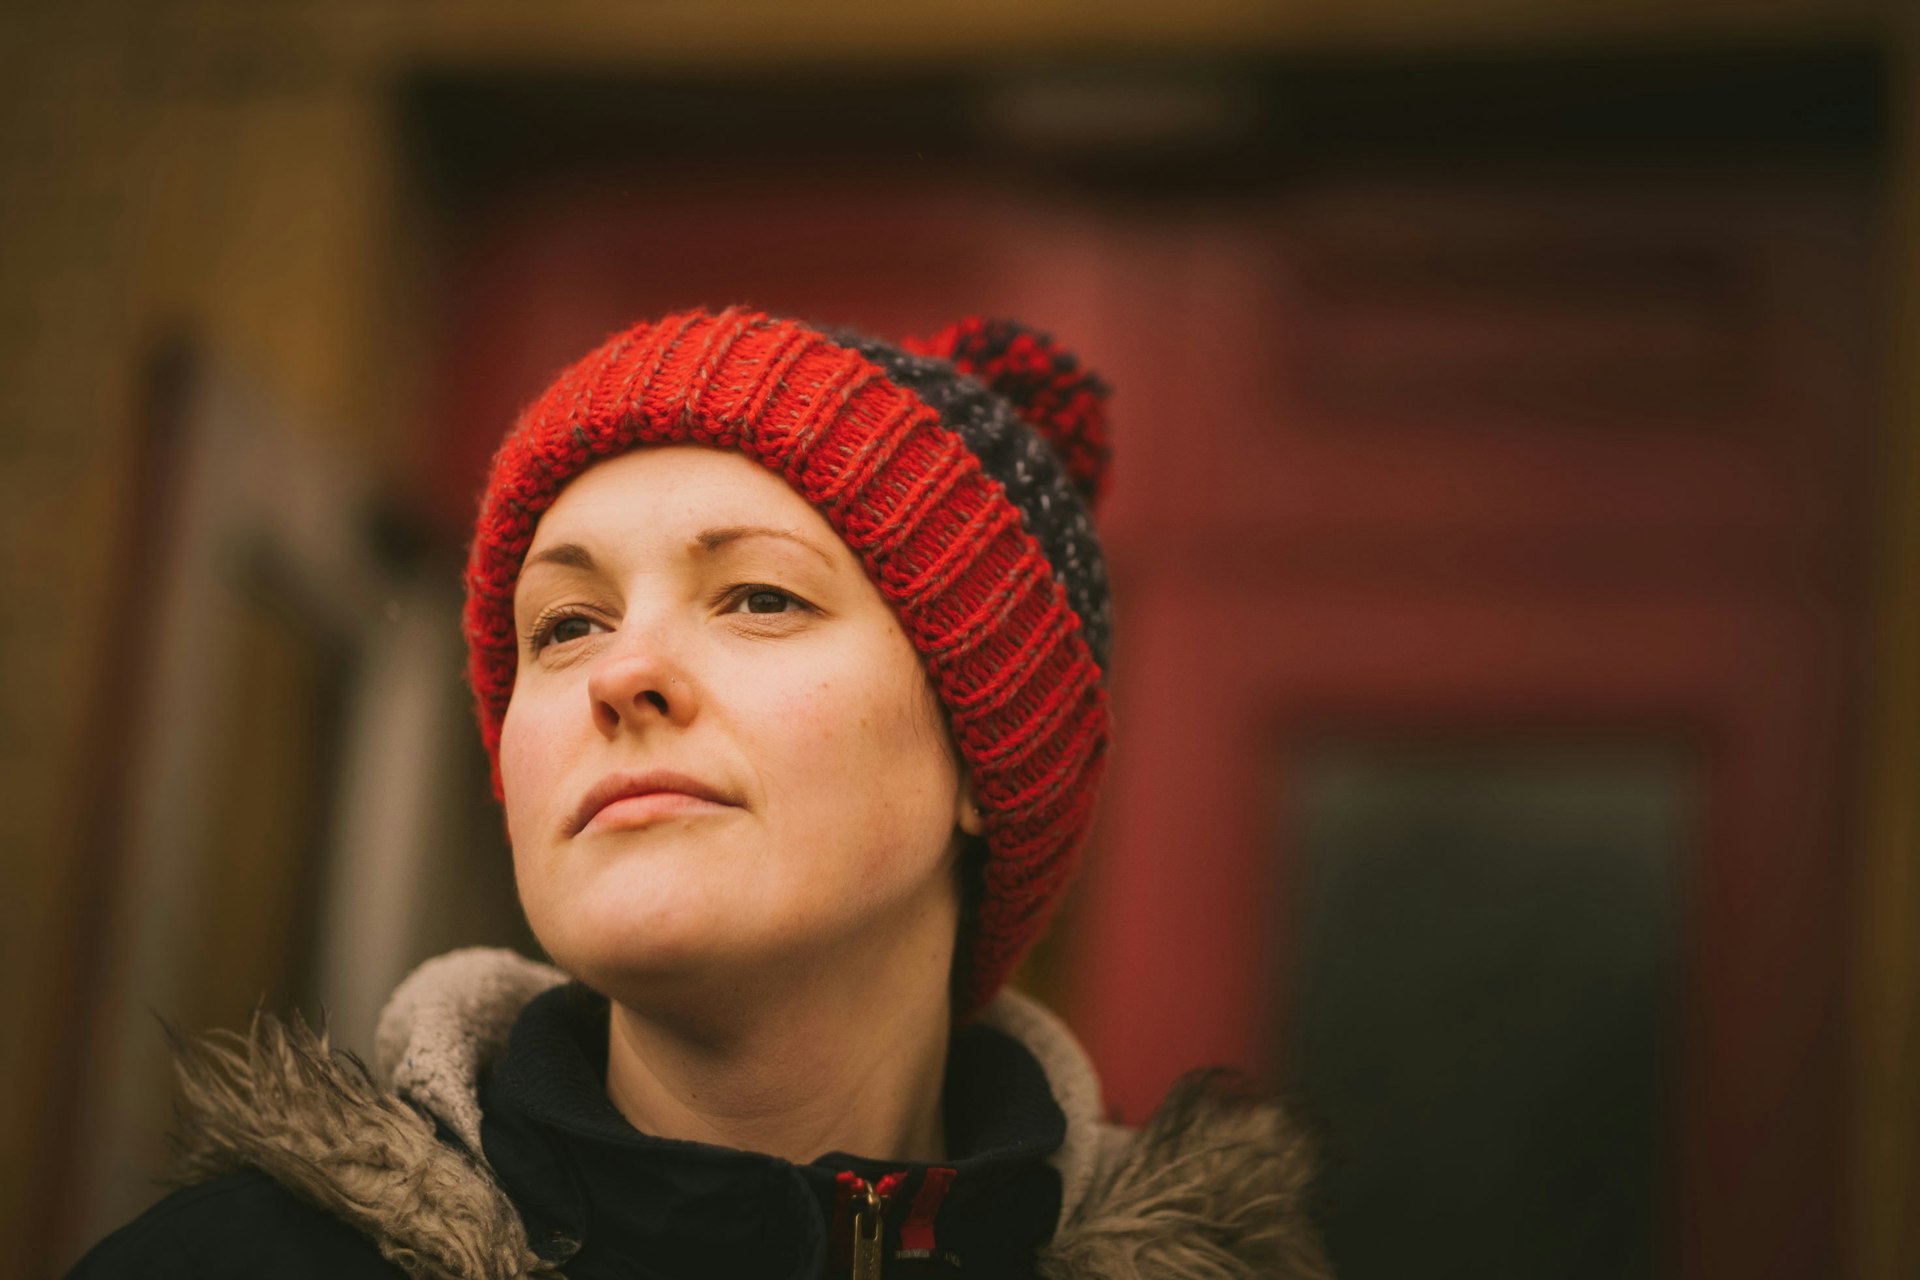 Comedian Josie Long on using humour as a force for change